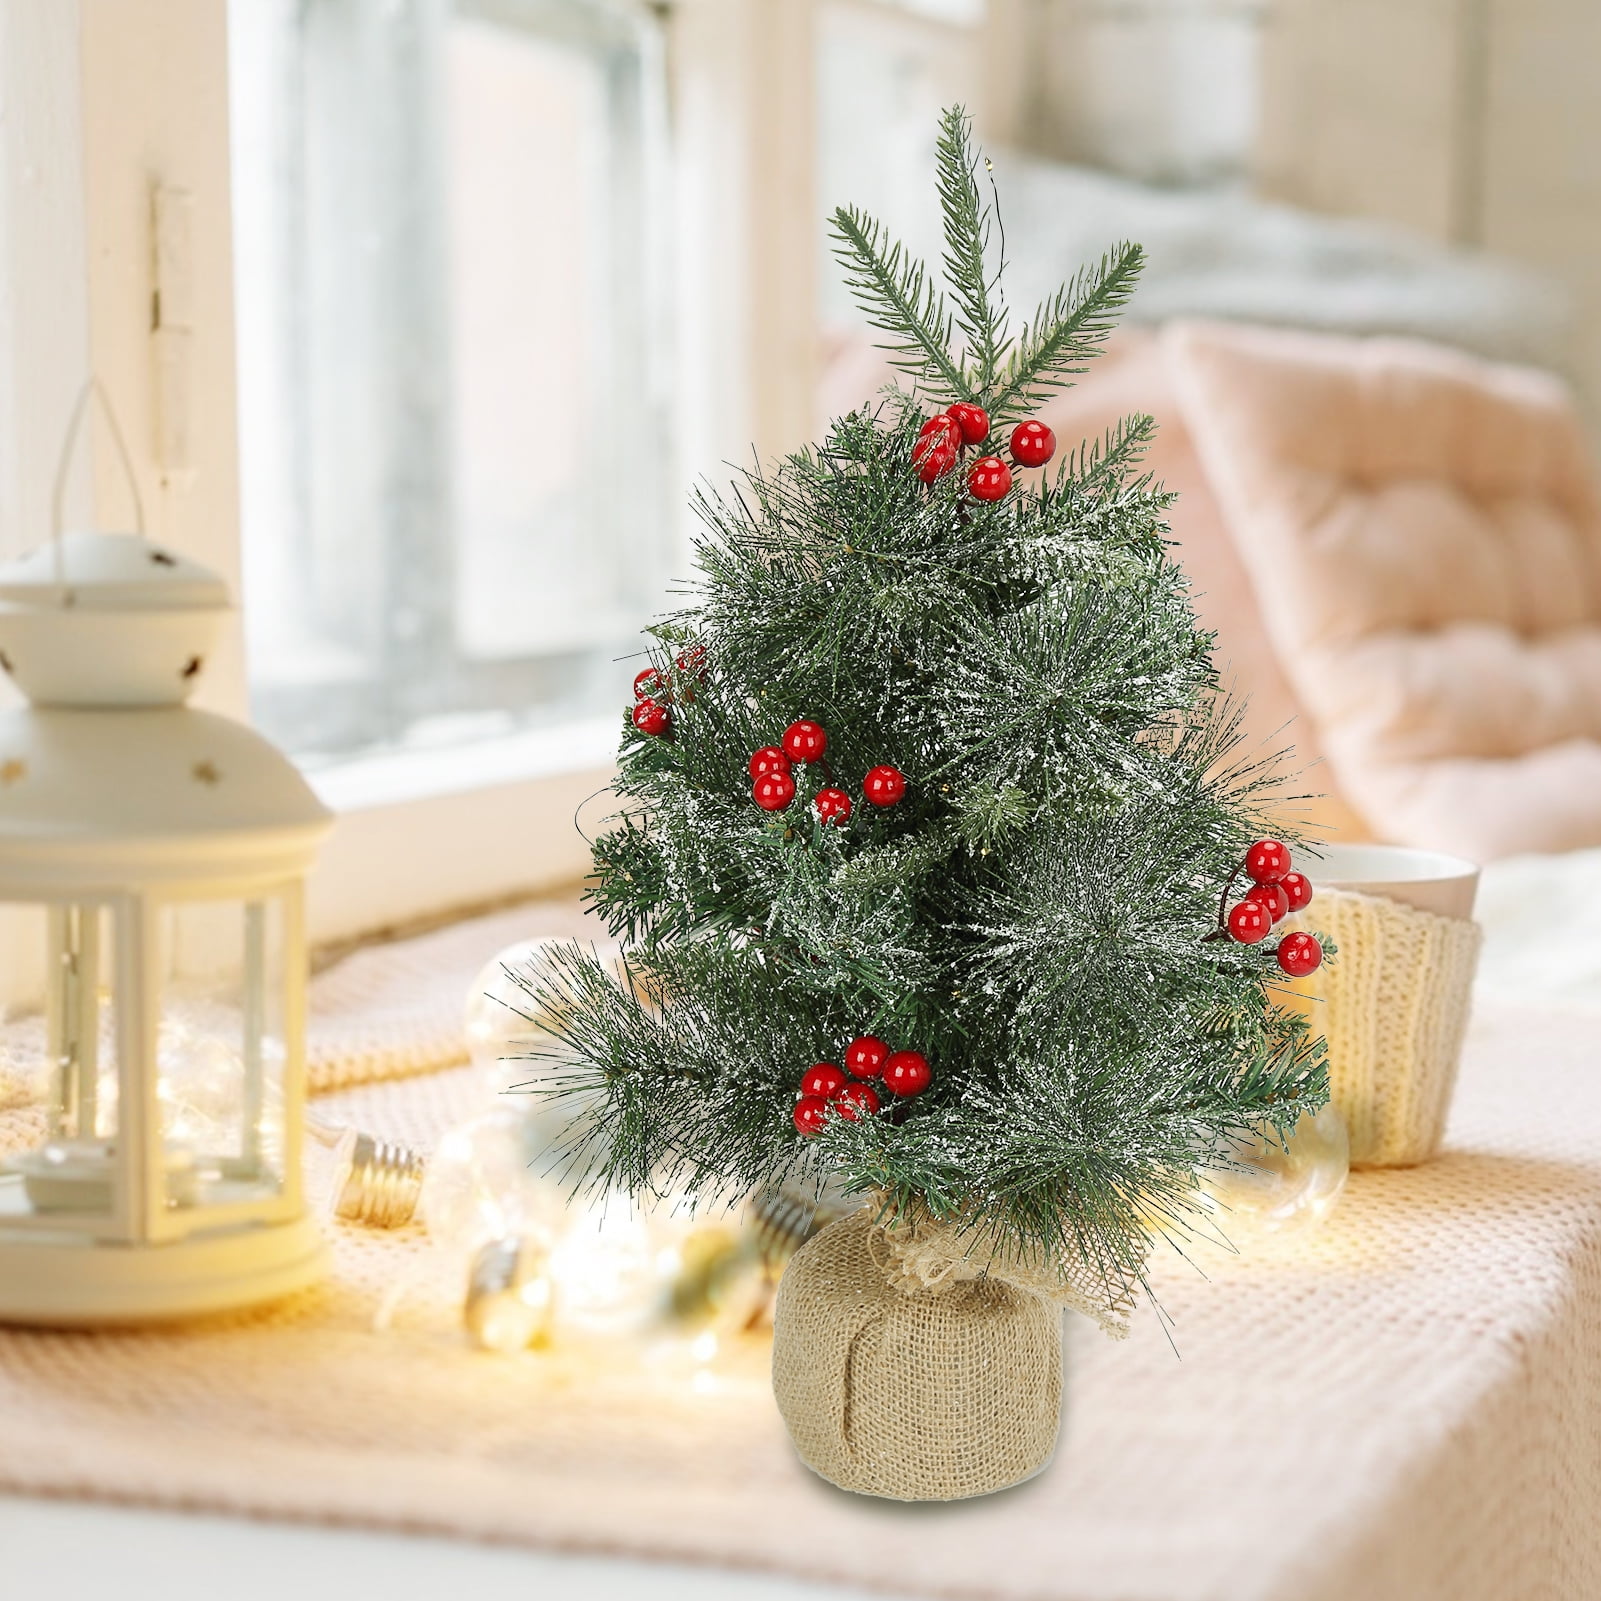 18-inch Miniature Pine Artificial Trees in Red Sack – ChristmasCottage